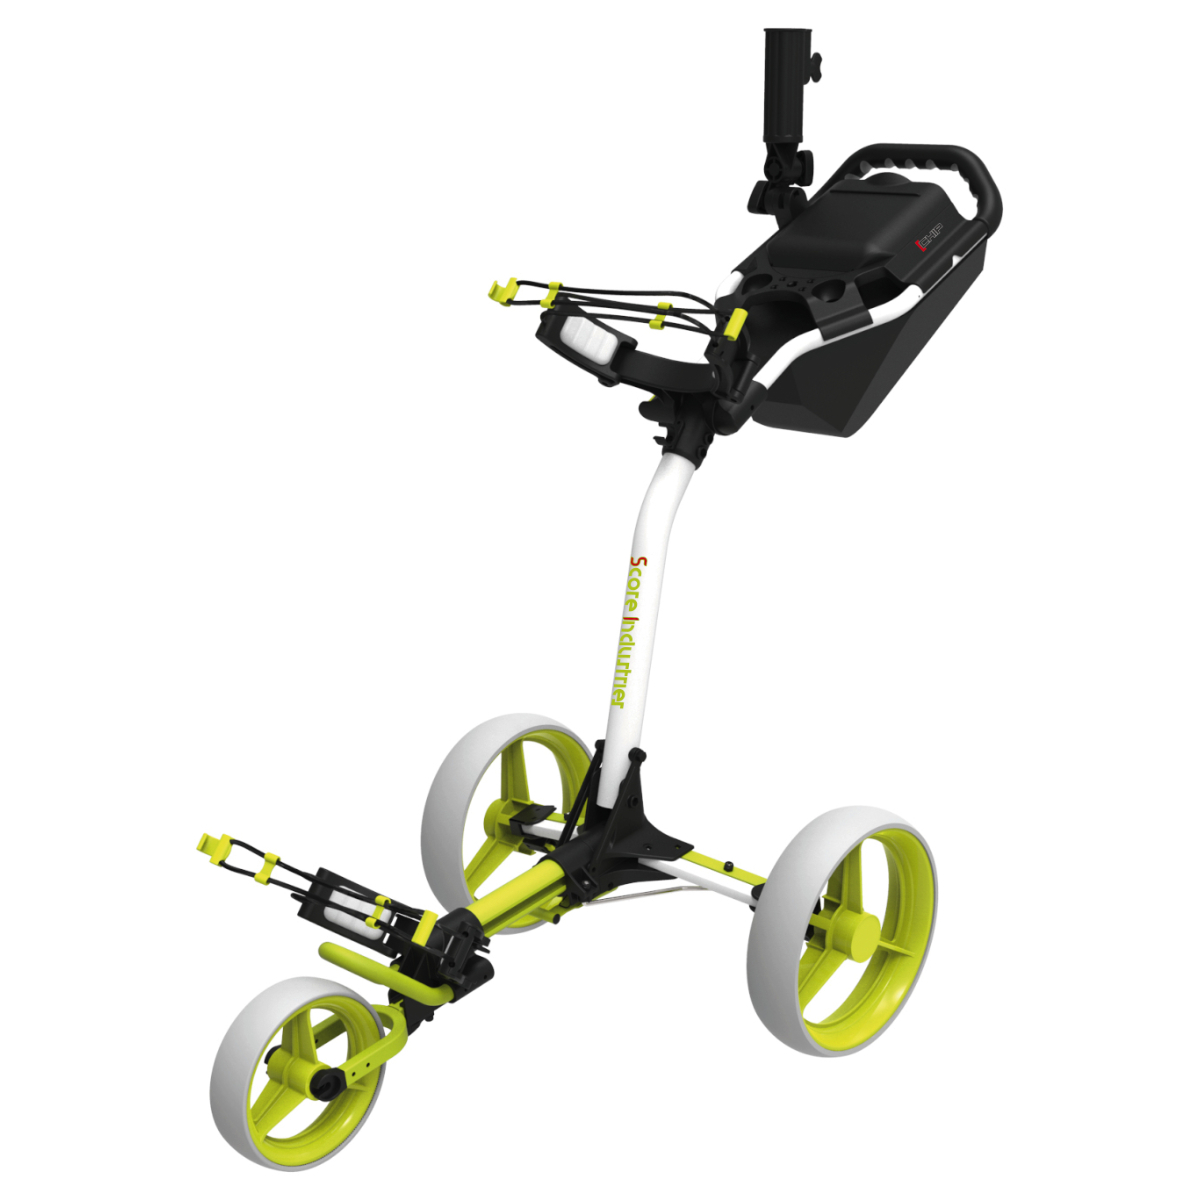 Score Industries Chip SW 8500 White/Lime Trolley